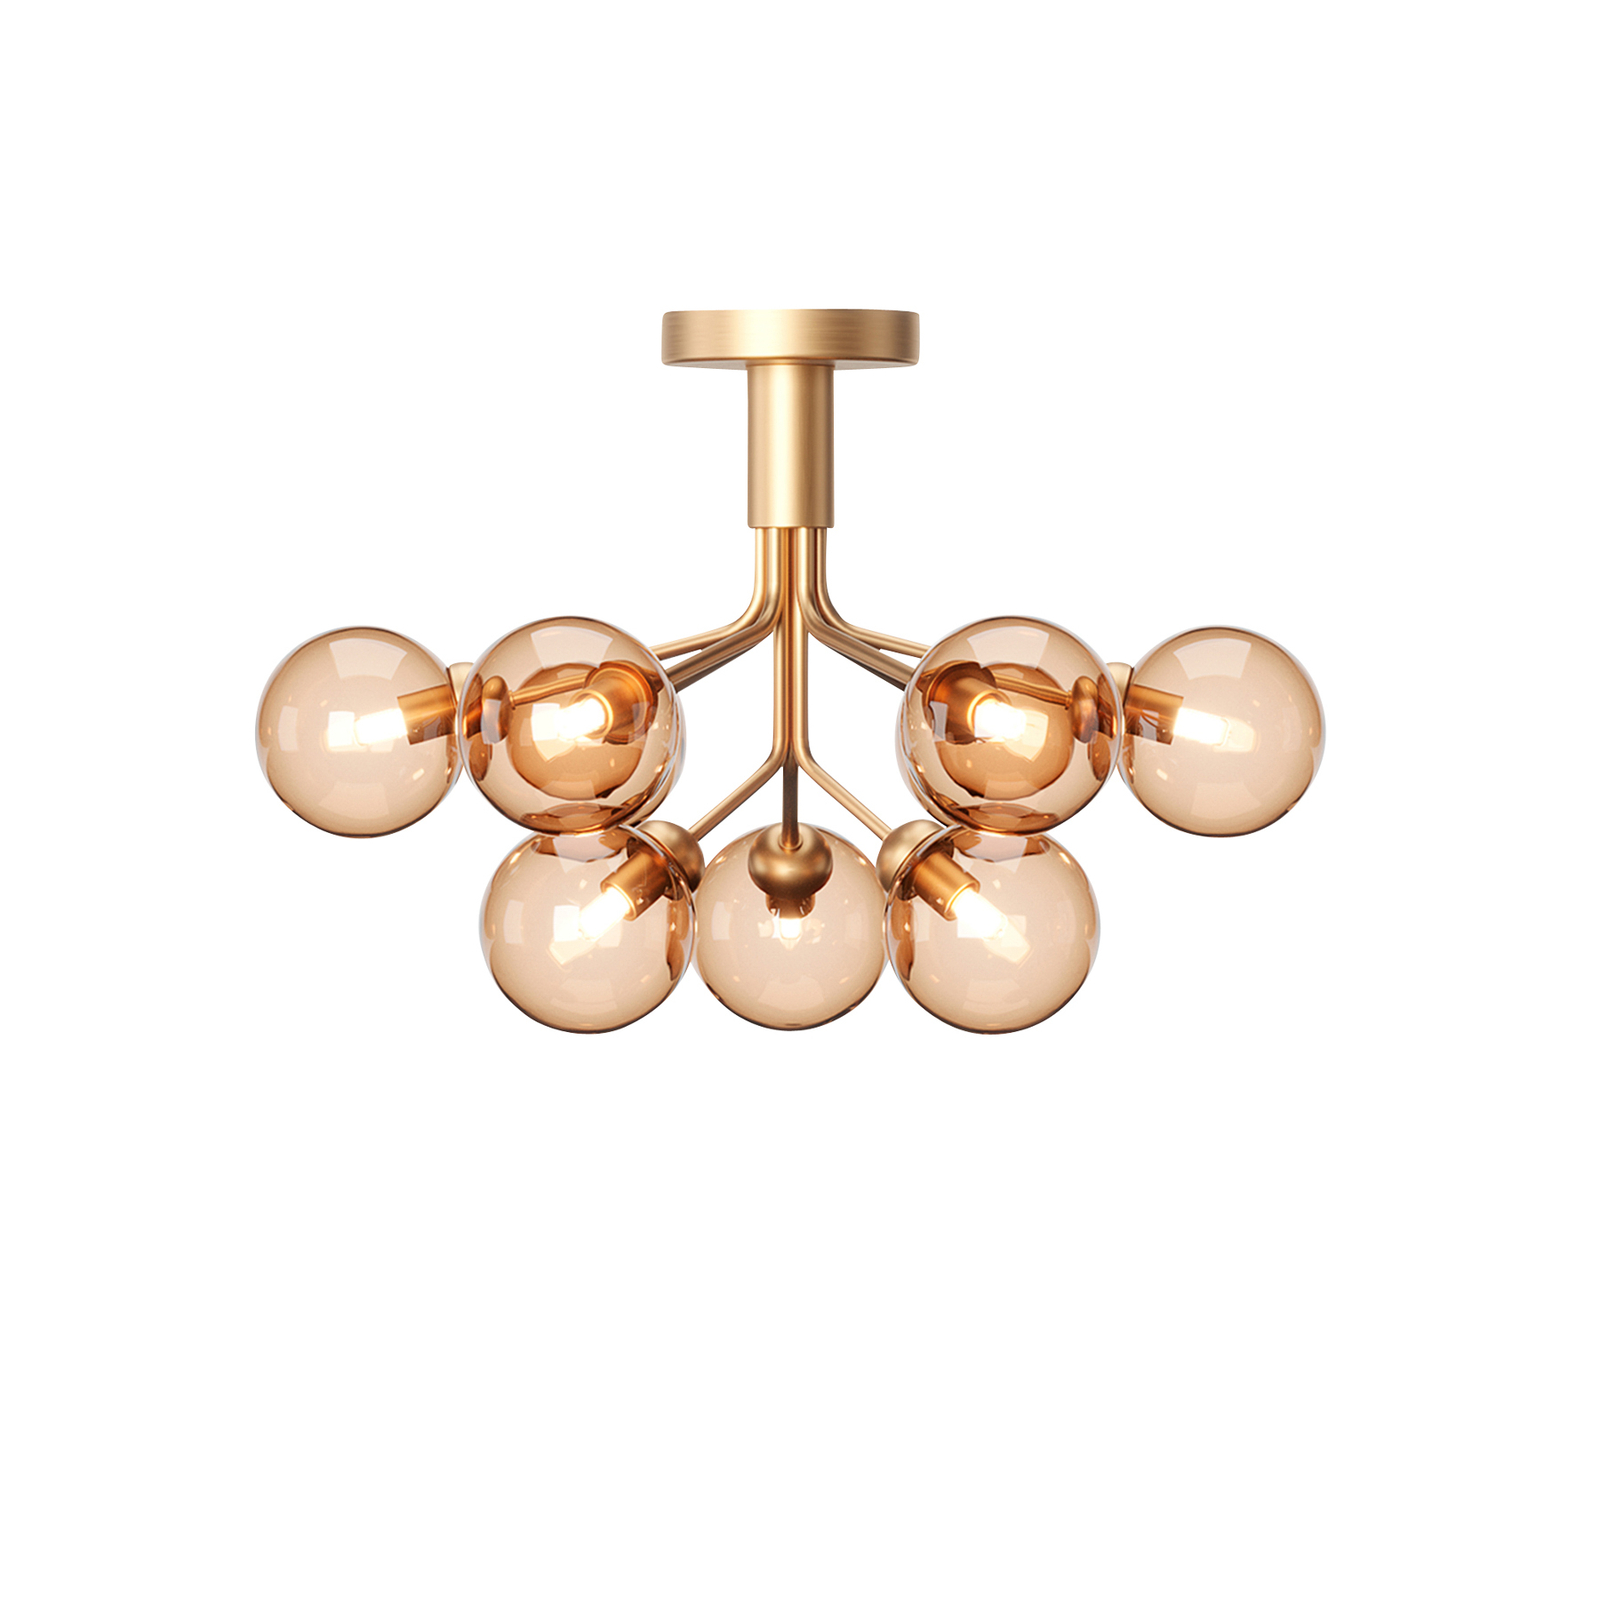 Nuura Apiales 9 Ceiling taklampe, messing/gold